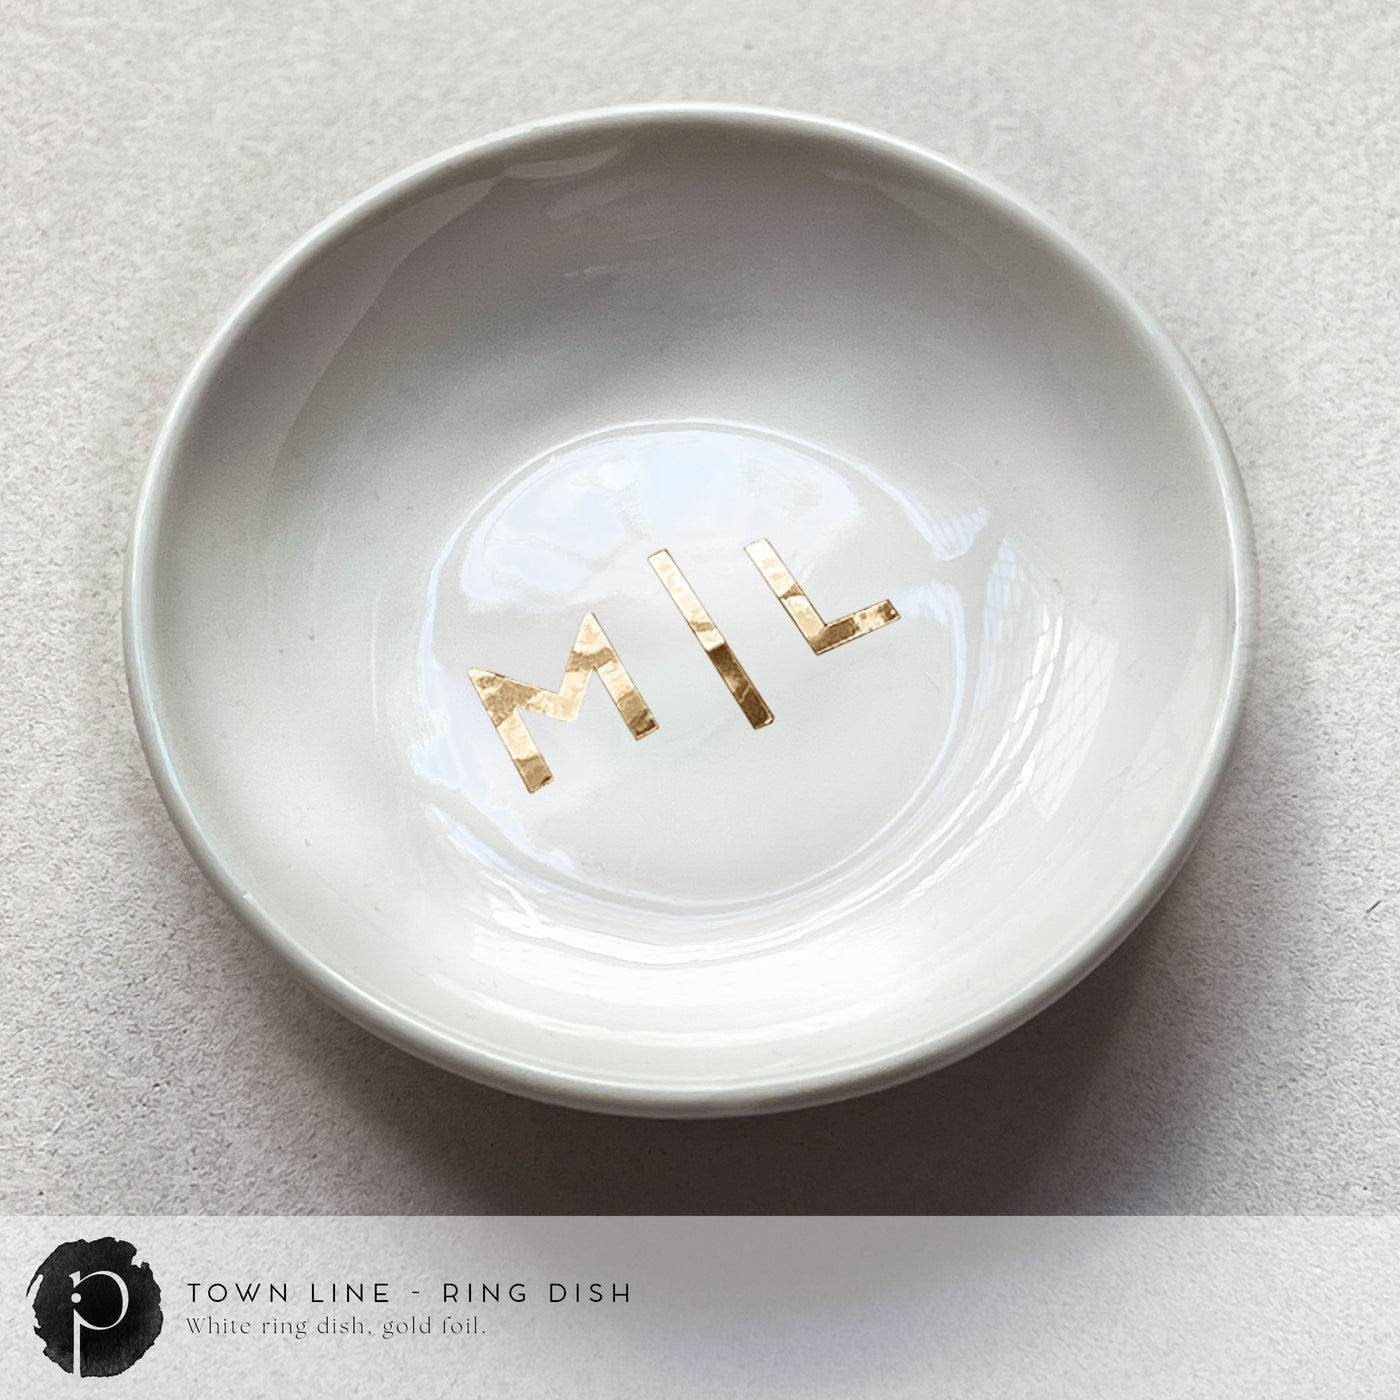 Personalised White Ring Dish - Town Line